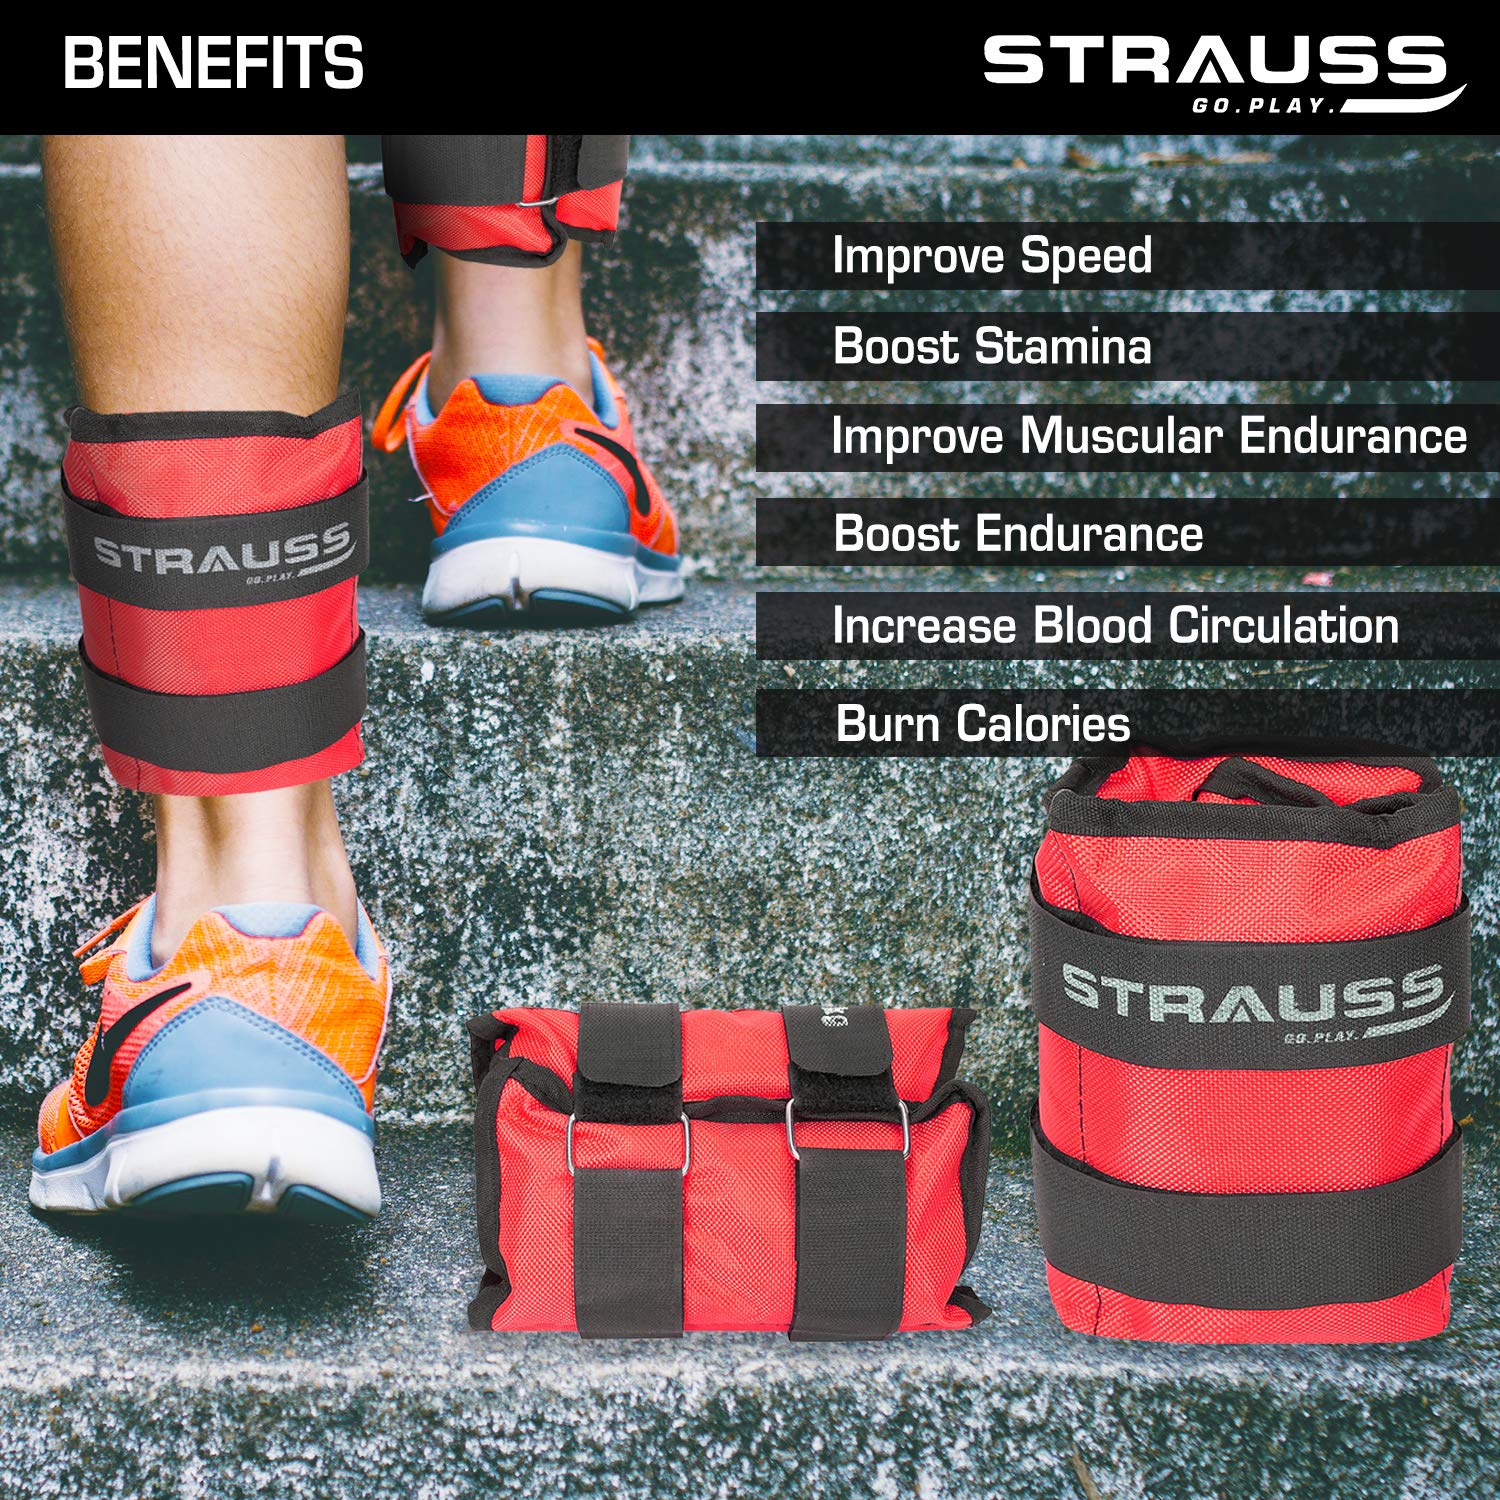 Strauss Ankle Weight, 5 Kg (Each), Pair, (Red)